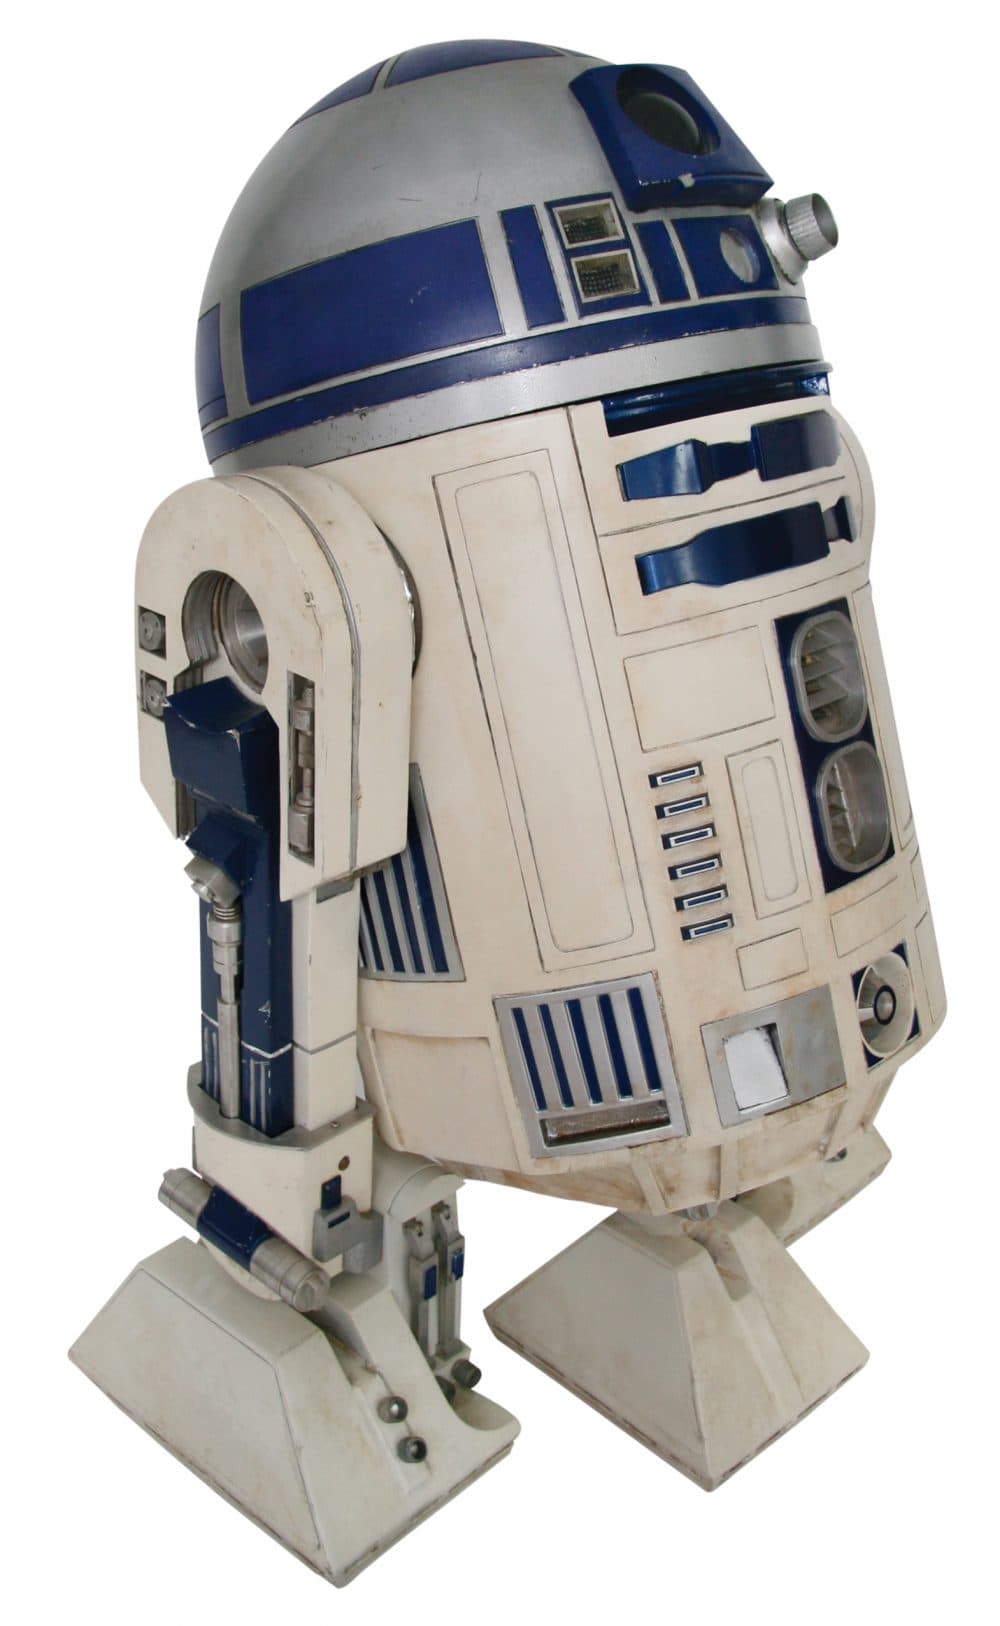 The R2-D2 going up for auction in California and online via Invaluable.(Courtesy Profiles in History Auction House)